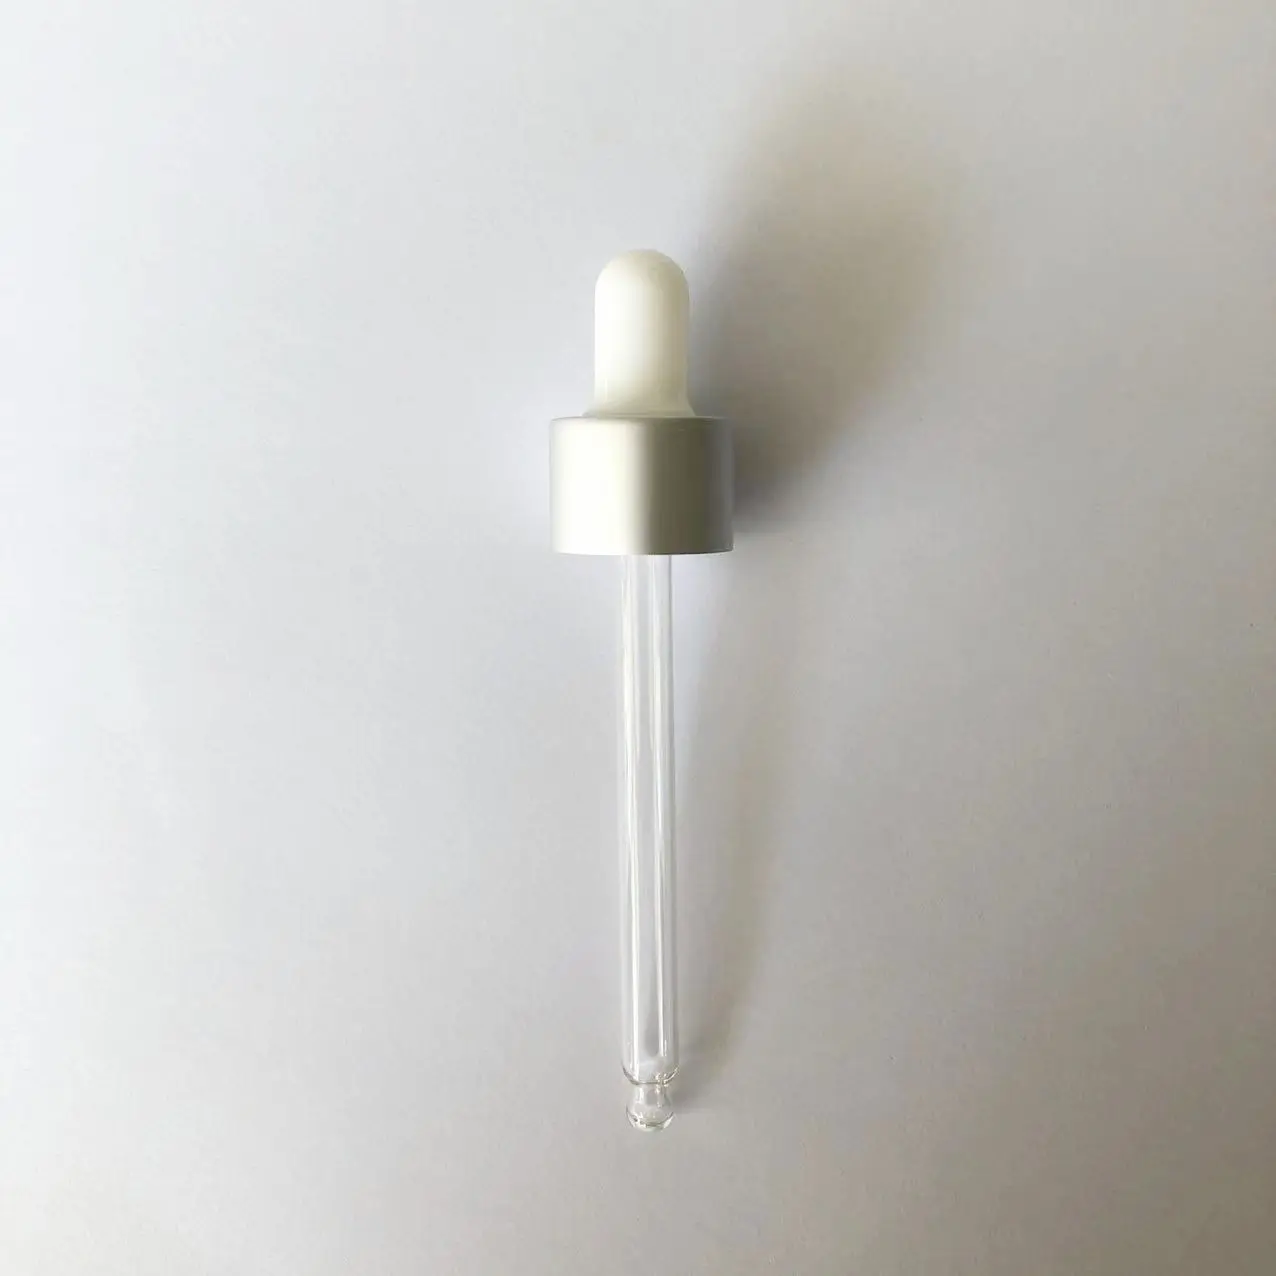 Teenitor Essential Oils Eye Dropper Pipette Dropper with Black Suction Bulb Straight-Tip Calibrated Droppers for Medicine